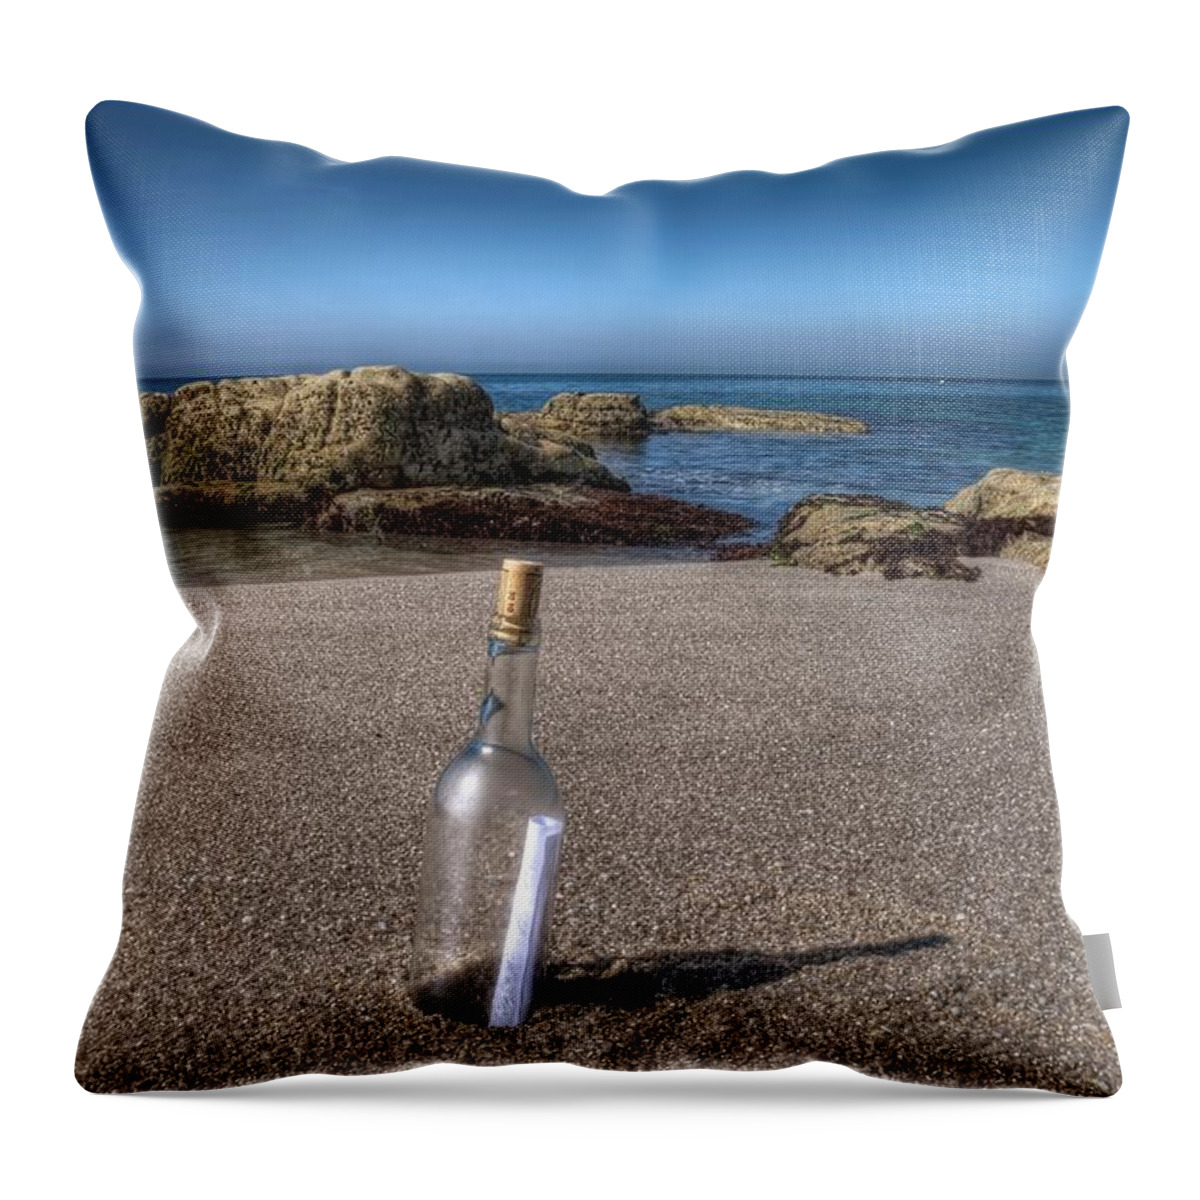 Tranquility Throw Pillow featuring the photograph Message In The Bottle by Emmanuel Lemée Photographie